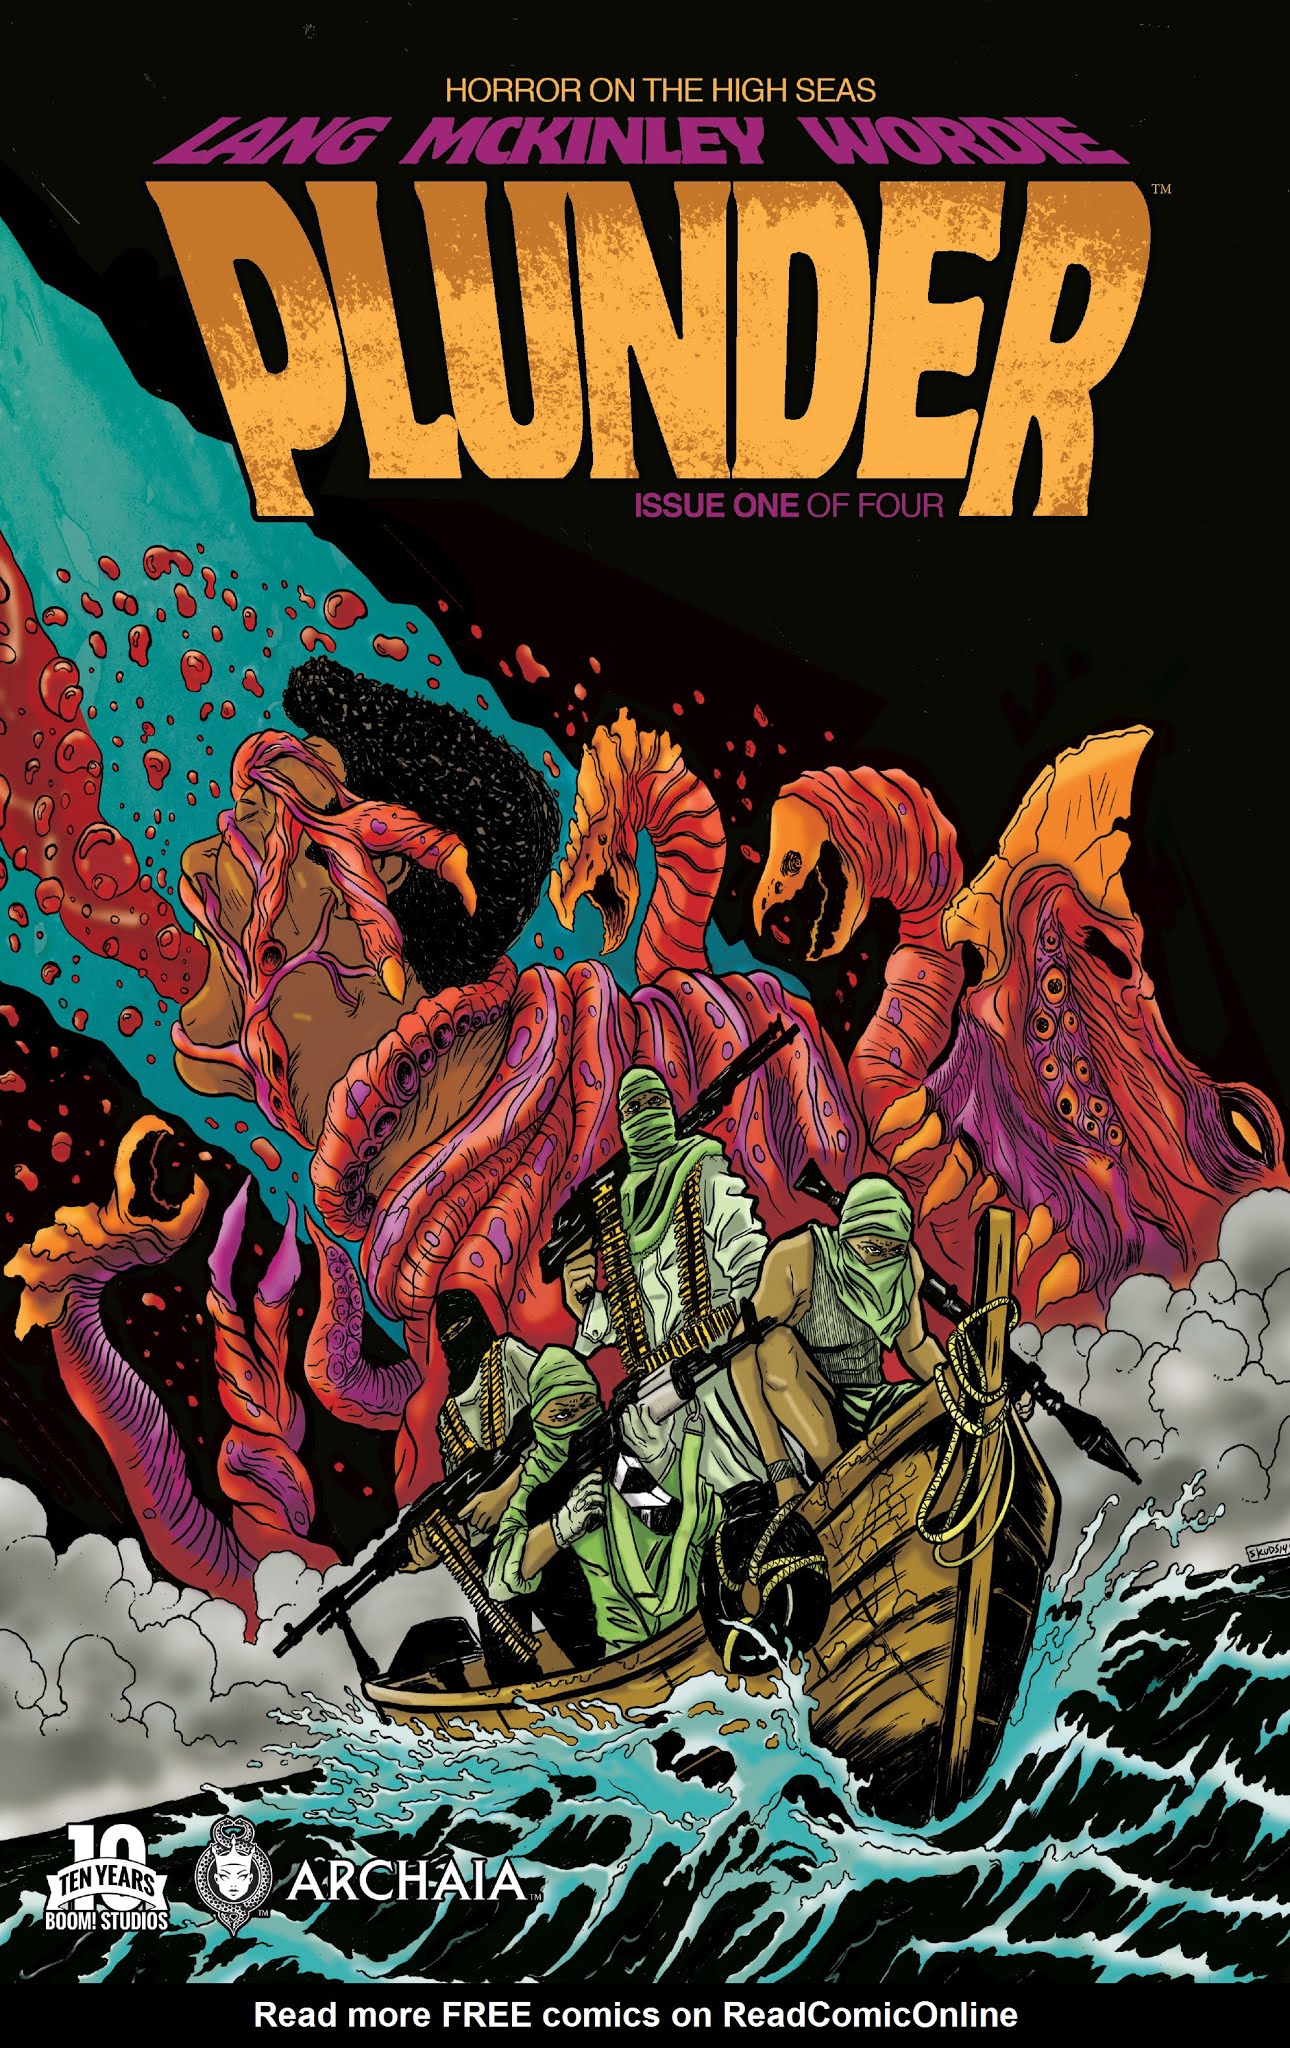 Read online Plunder comic -  Issue #1 - 1